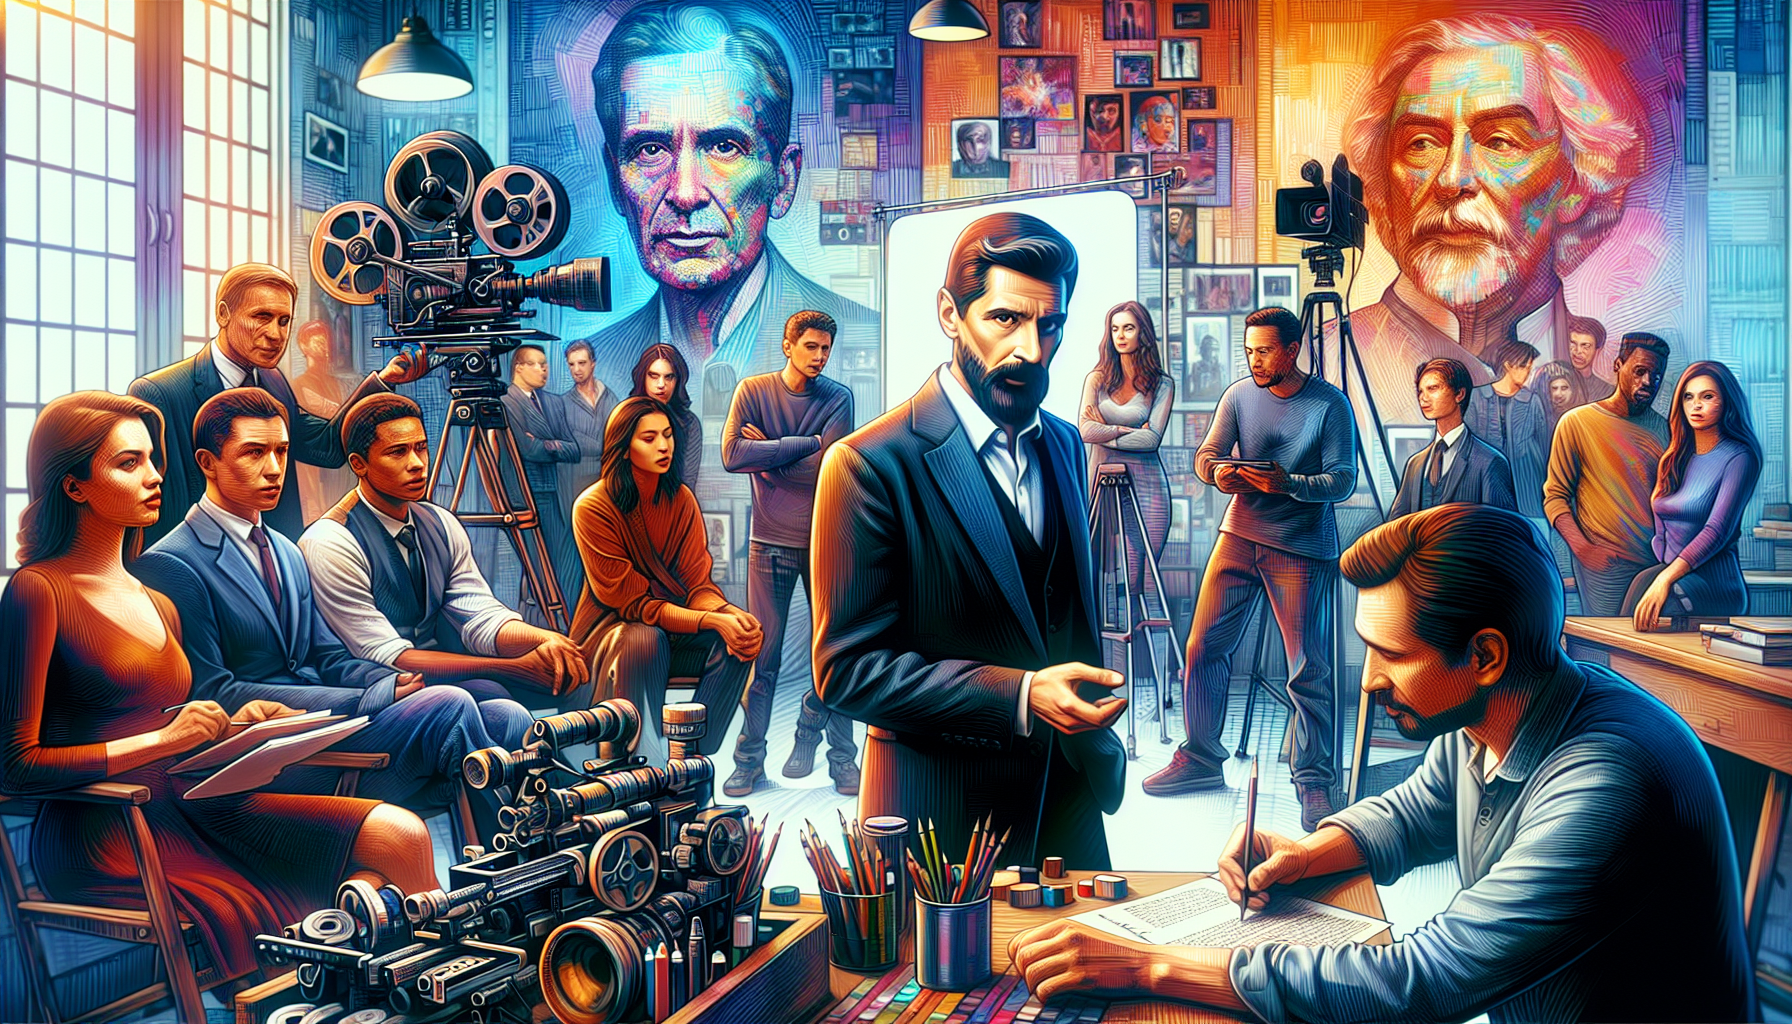 An artistic portrayal of Ben Shapiro standing in a vibrant film studio, surrounded by actors, scriptwriters, and cameras, actively discussing a screenplay, with elements of creativity and professional